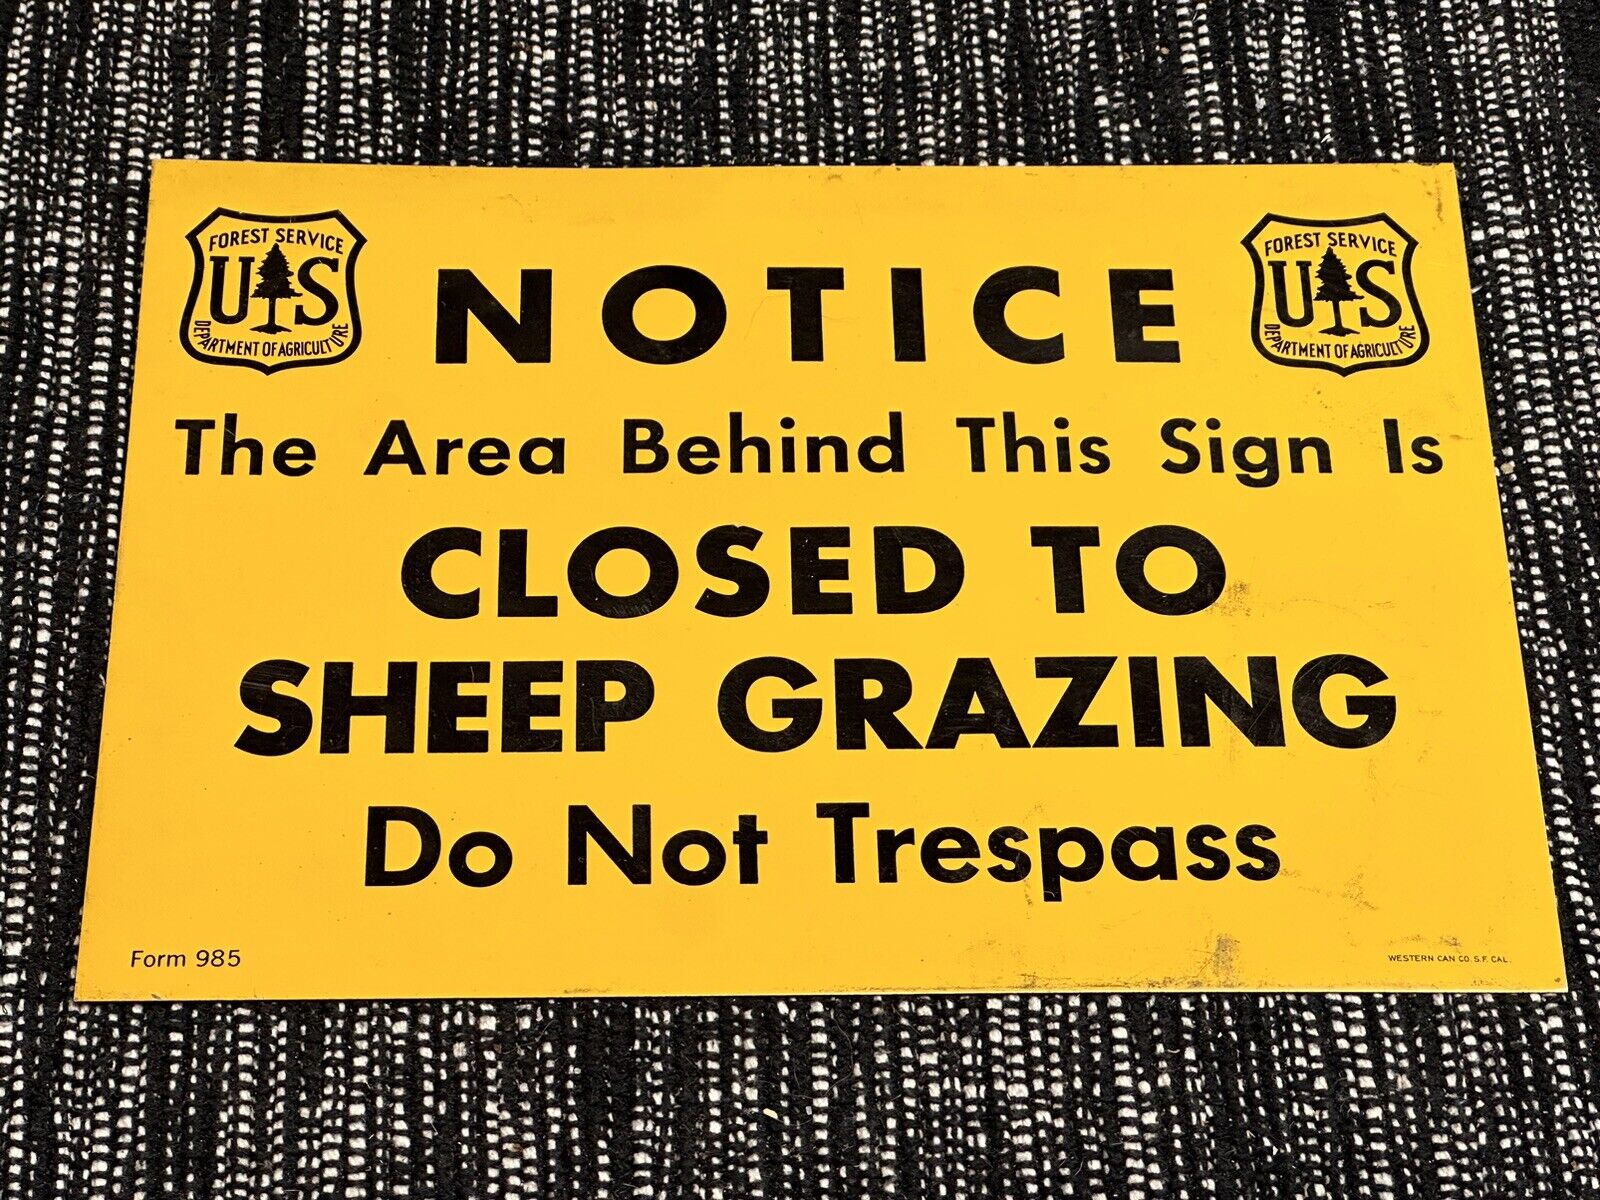 Vintage USFS US Forest Forestry Service ”CLOSED TO SHEEP GRAZING” Metal Sign